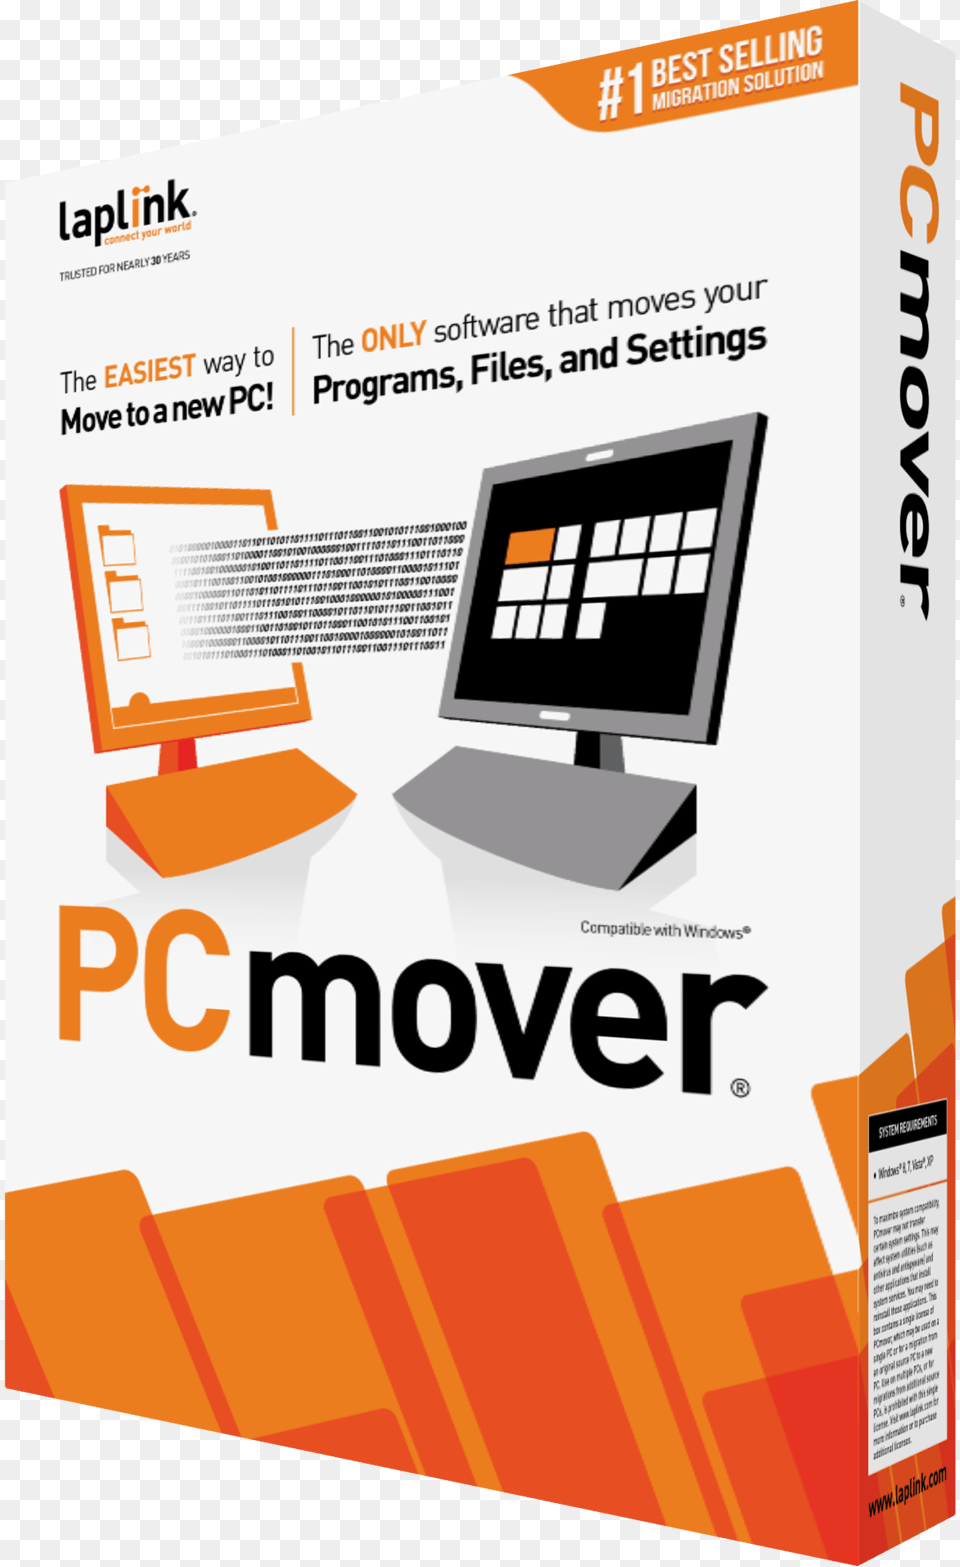 Pcmover Blank Right Laplink Pcmover Express, Advertisement, Poster, Computer Hardware, Electronics Png Image